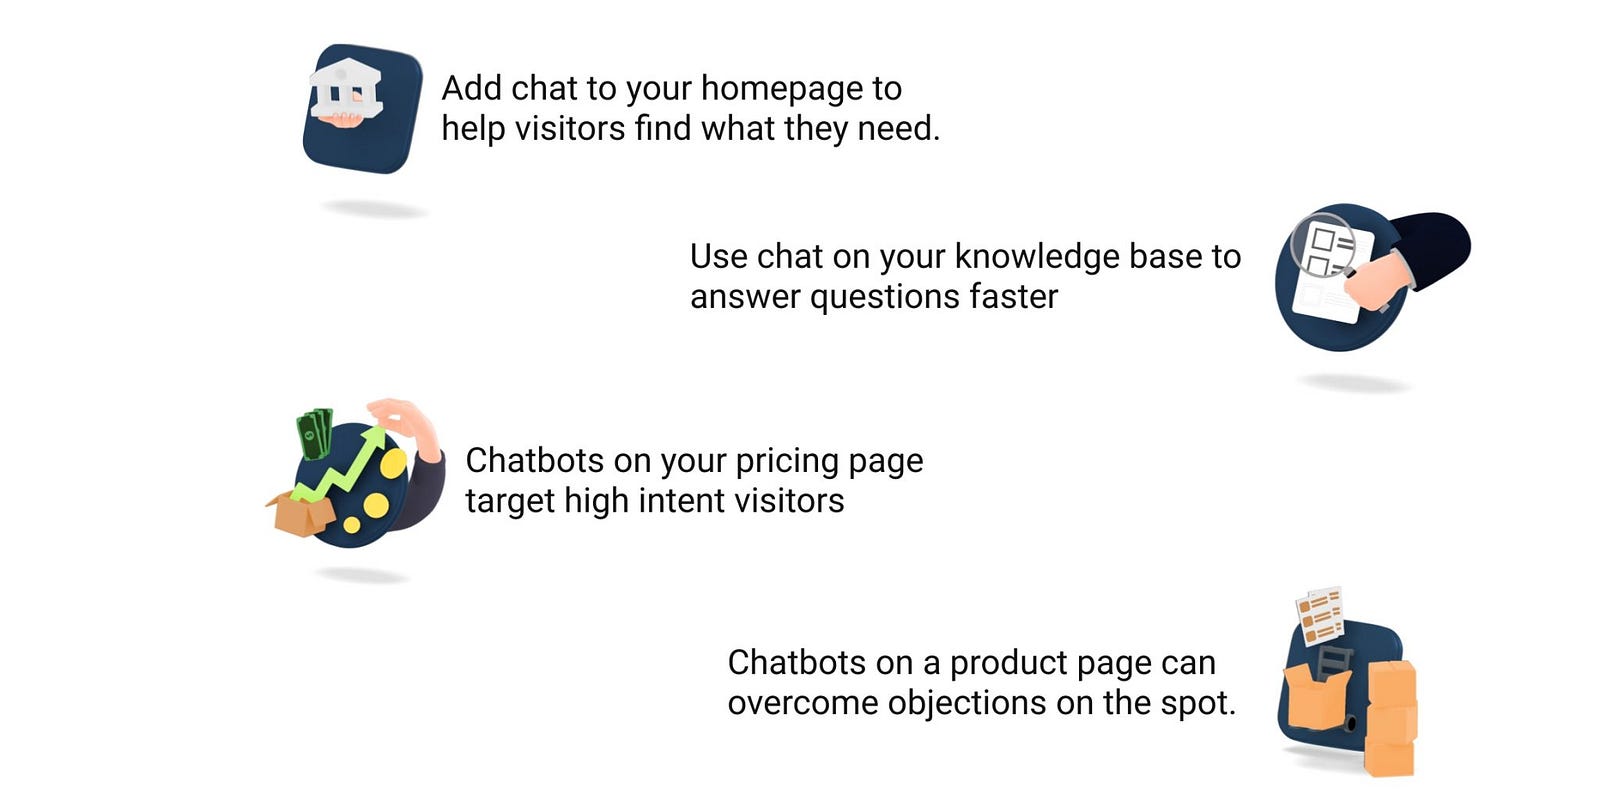 Add chat to your homepage to help visitors find what they need. Use chat on your knowledge base to answer questions faster. Chatbots on your pricing page target high intent visitors. Chatbots on a prodcut page can overcome objections on the spot.